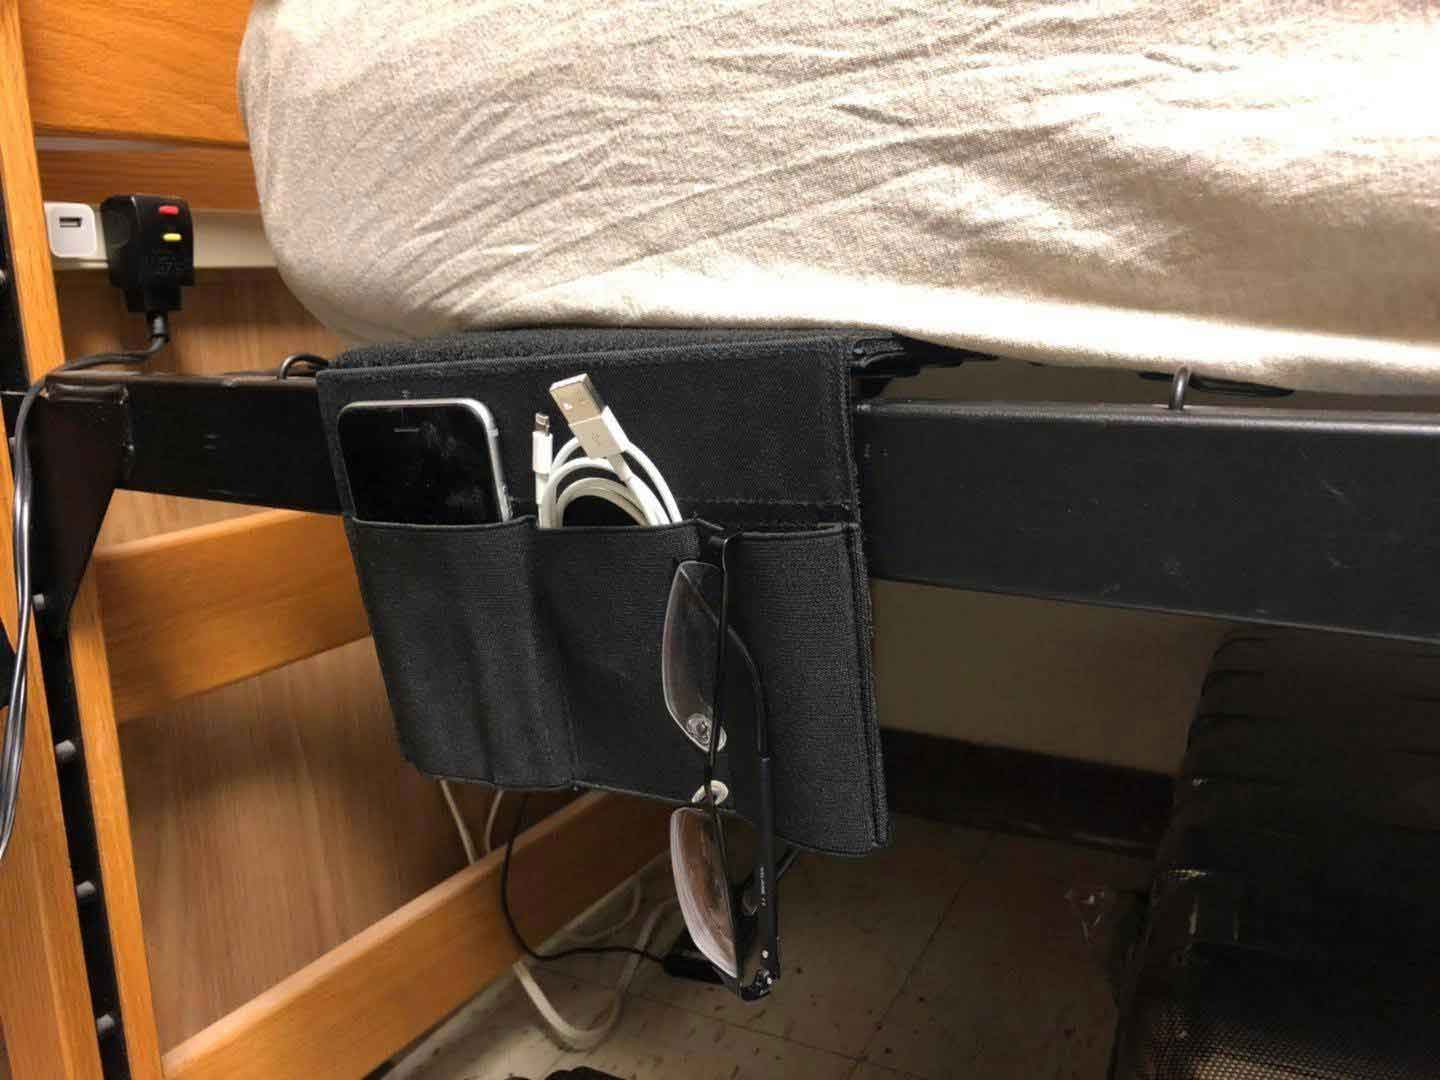 Dinosaurized | Morpheus bedside holster | Best bedside holster in America | Sticky & snug | Best holster for emergency |high quality material | space & time saving |Most needed holster when you sleep